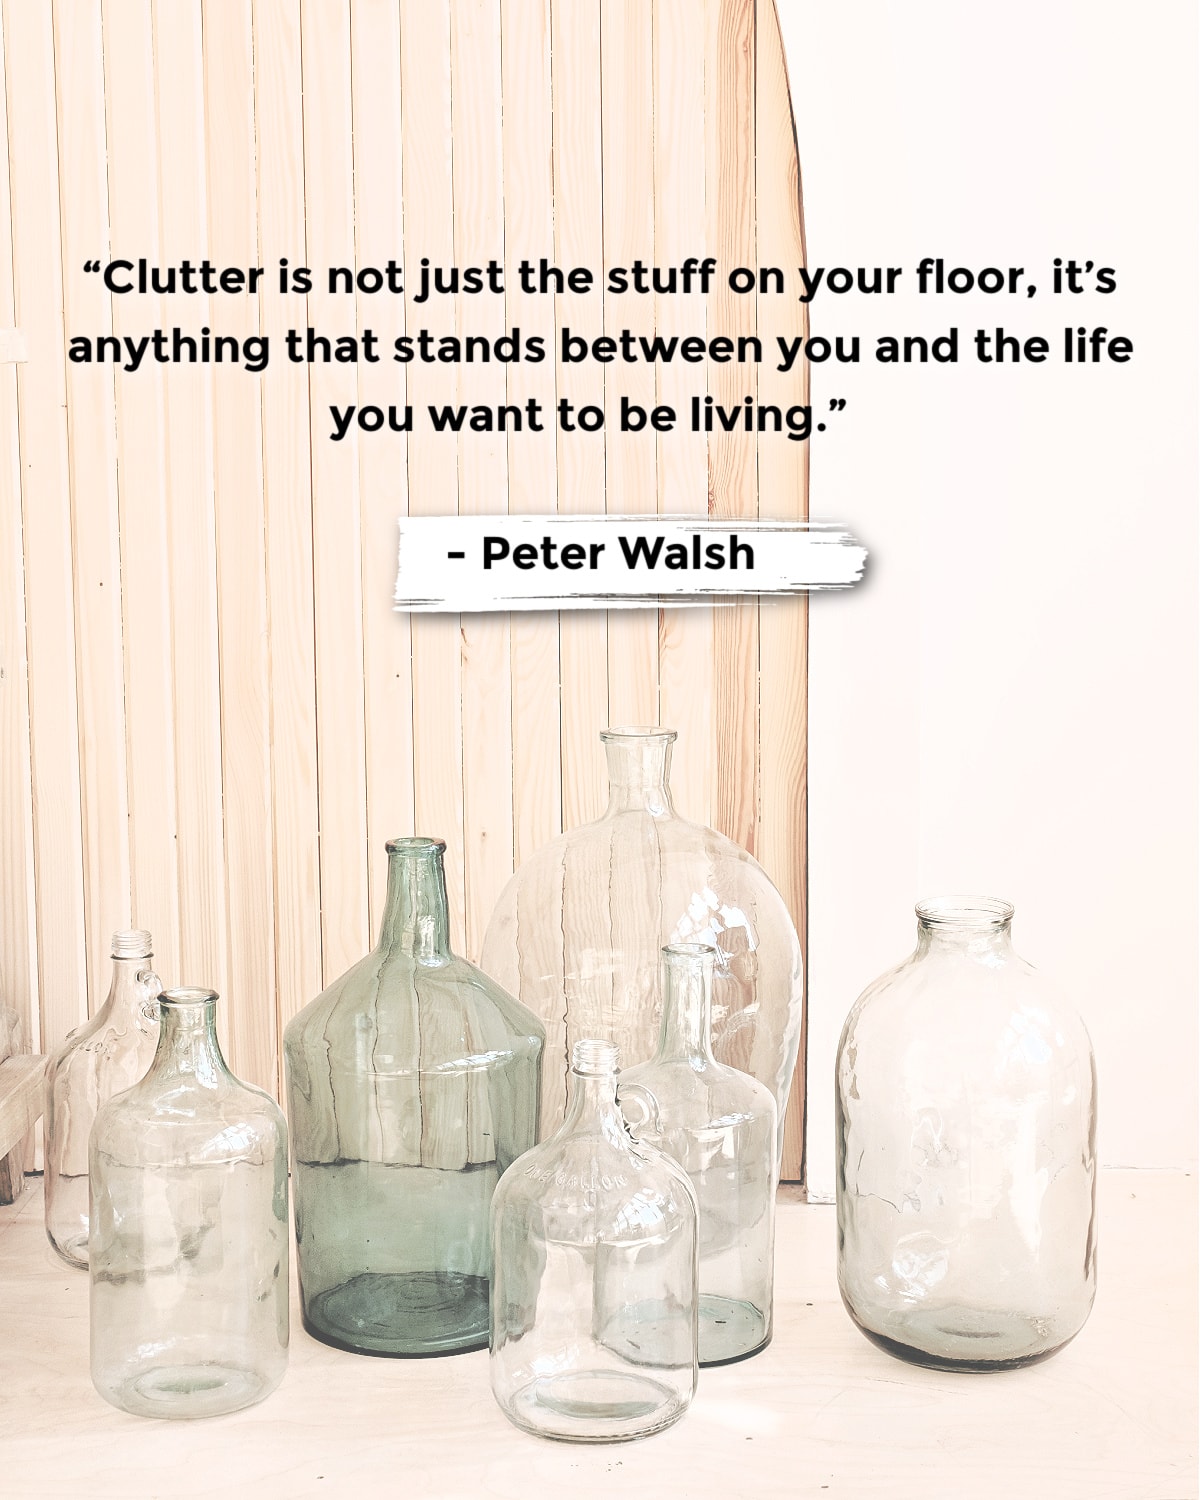 A quote about clutter from Peter Walsh next to bottles on the floor.